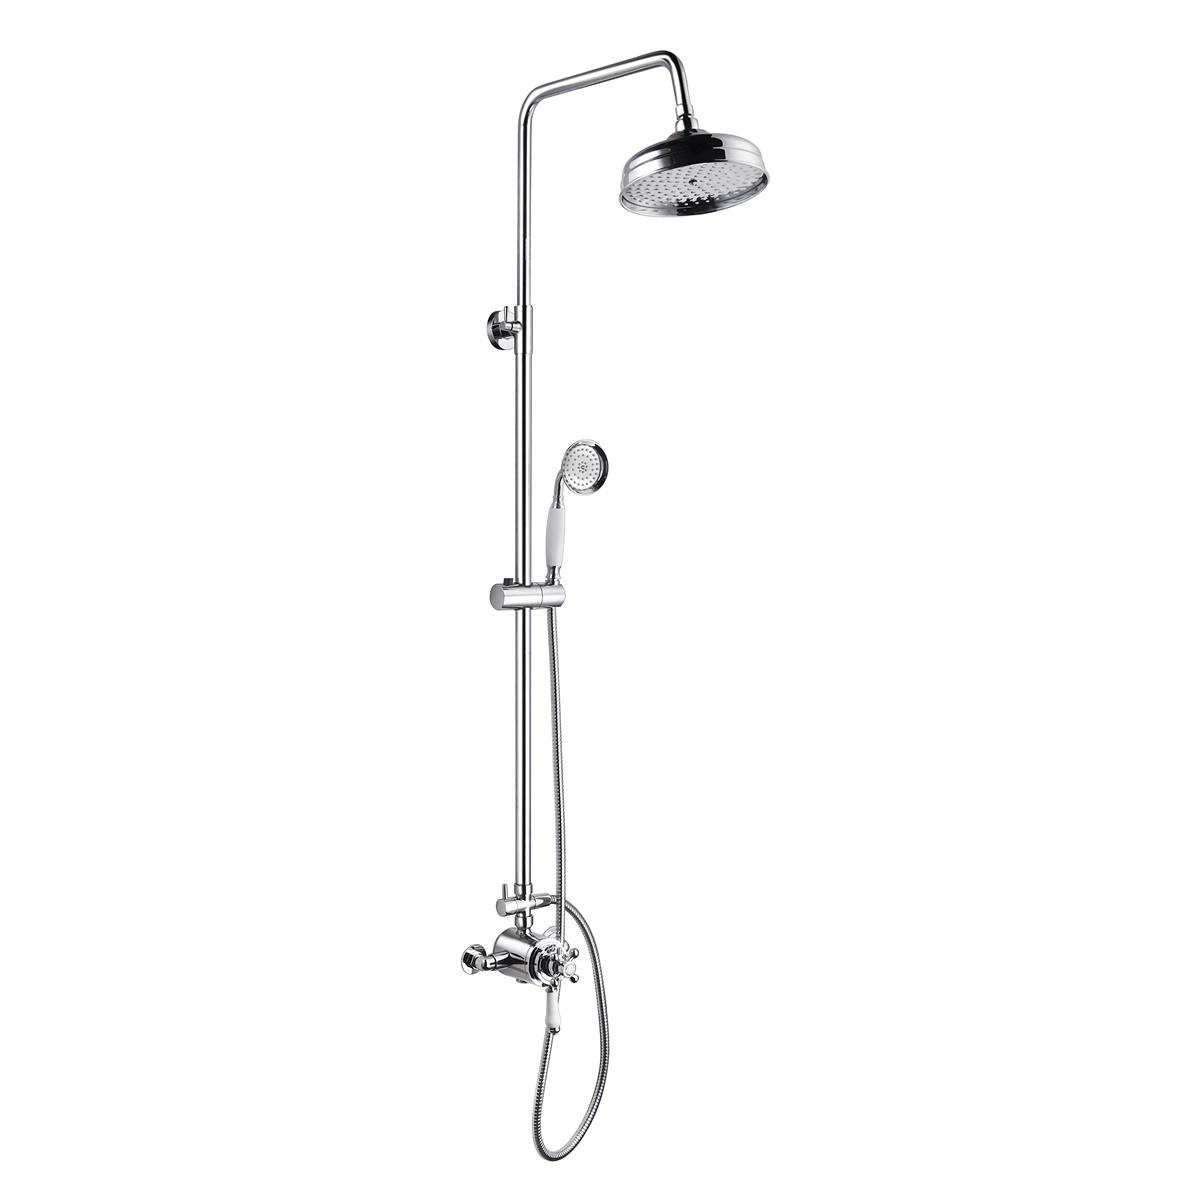 YS34172A	WRAS and TMV2 certified Shower column, rain shower column with retro thermostatic faucet for UK market